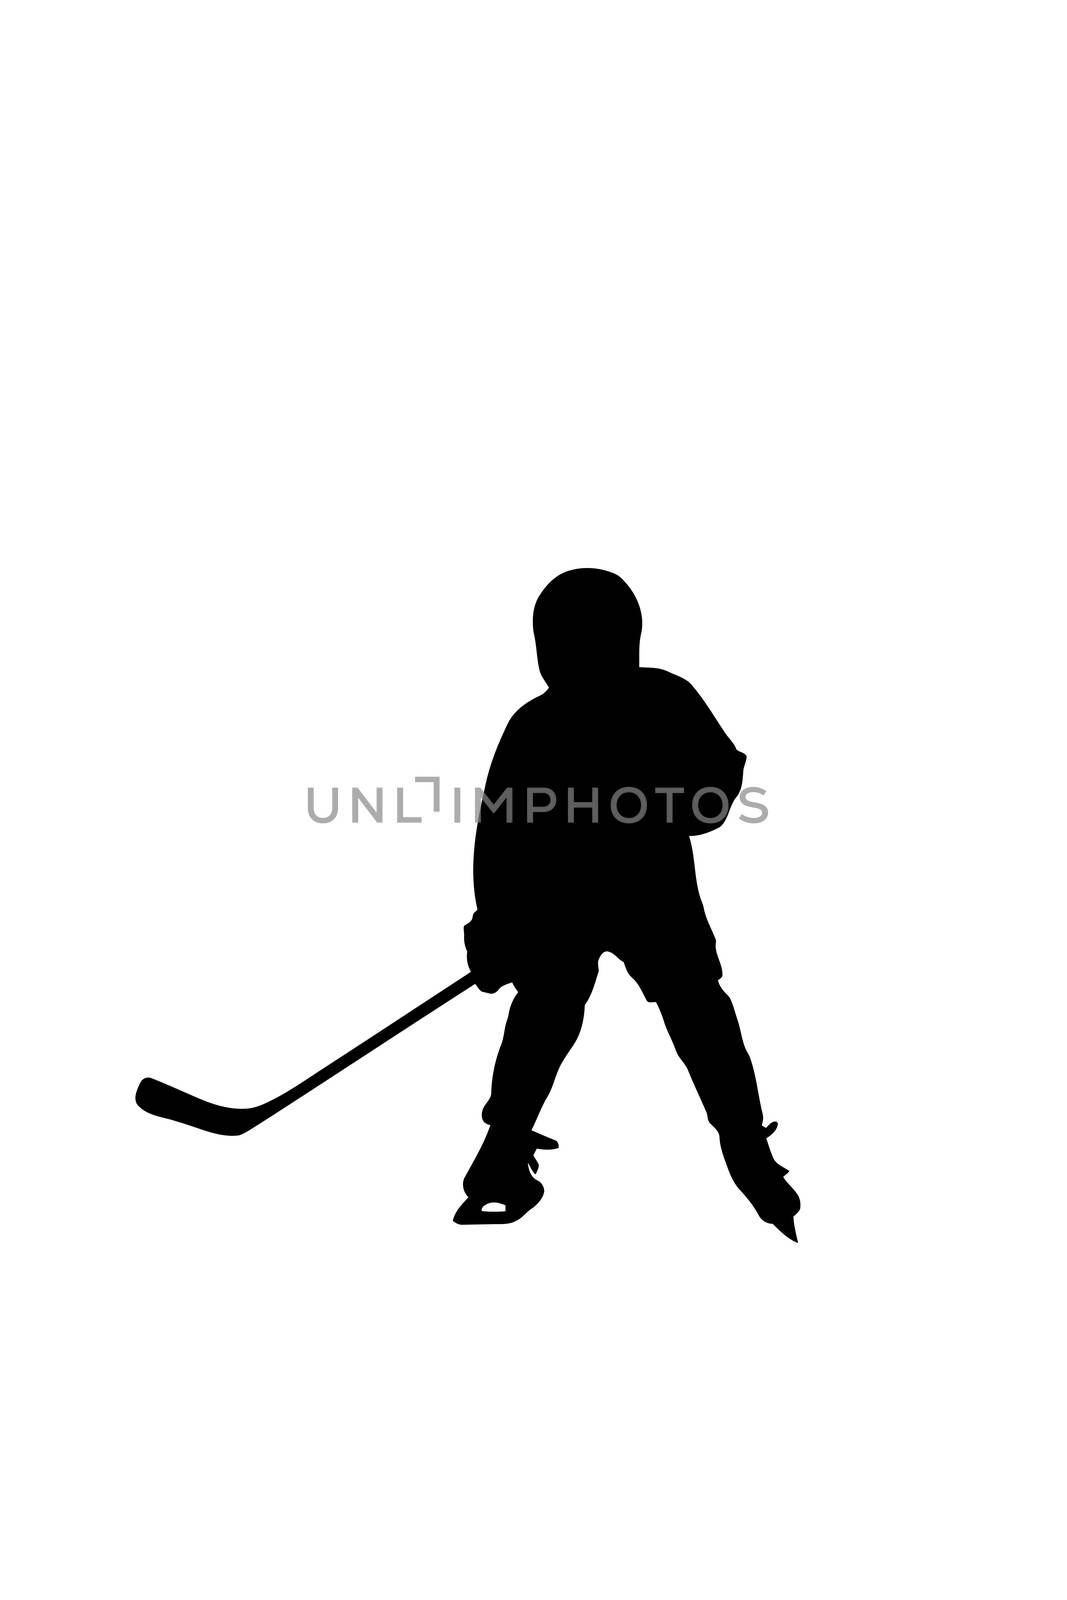 Silhouette of  hockey player, isolated on white background.